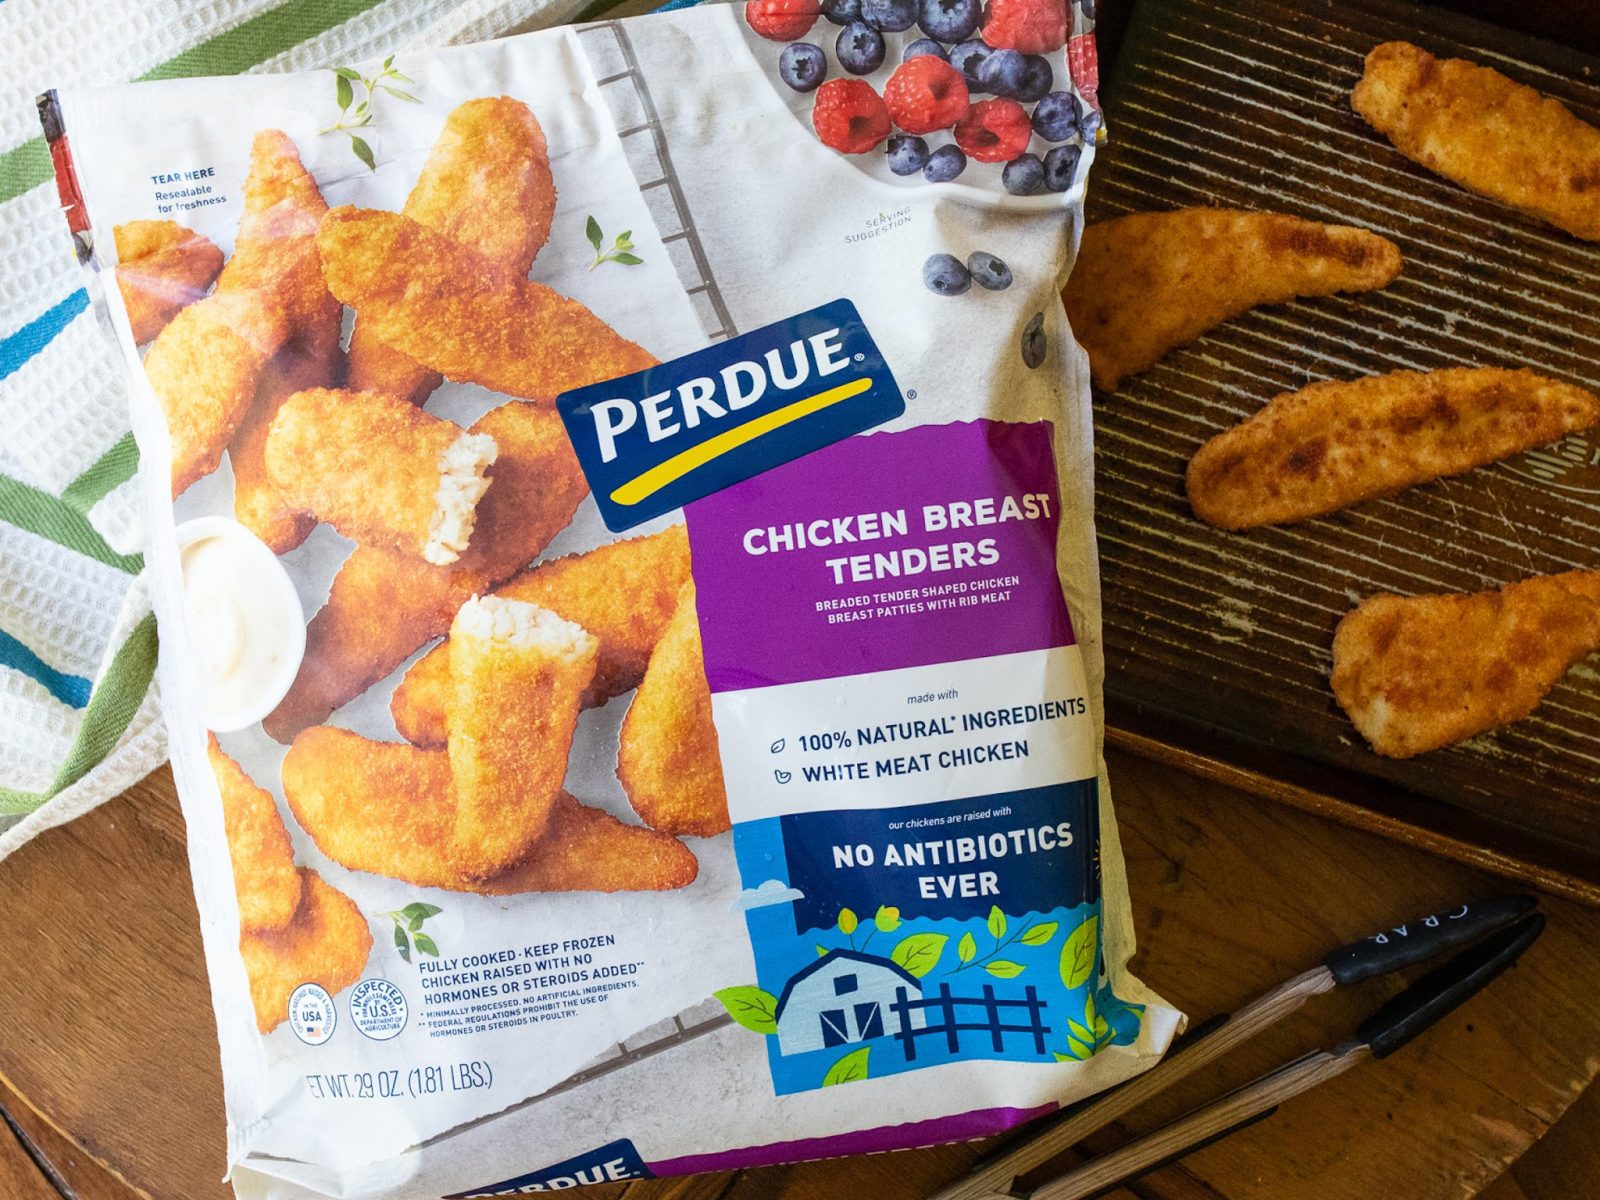 Nice Deal On Perdue Frozen Chicken – Get The Bags For Just $4.99 At Kroger (Regular Price $7.99)